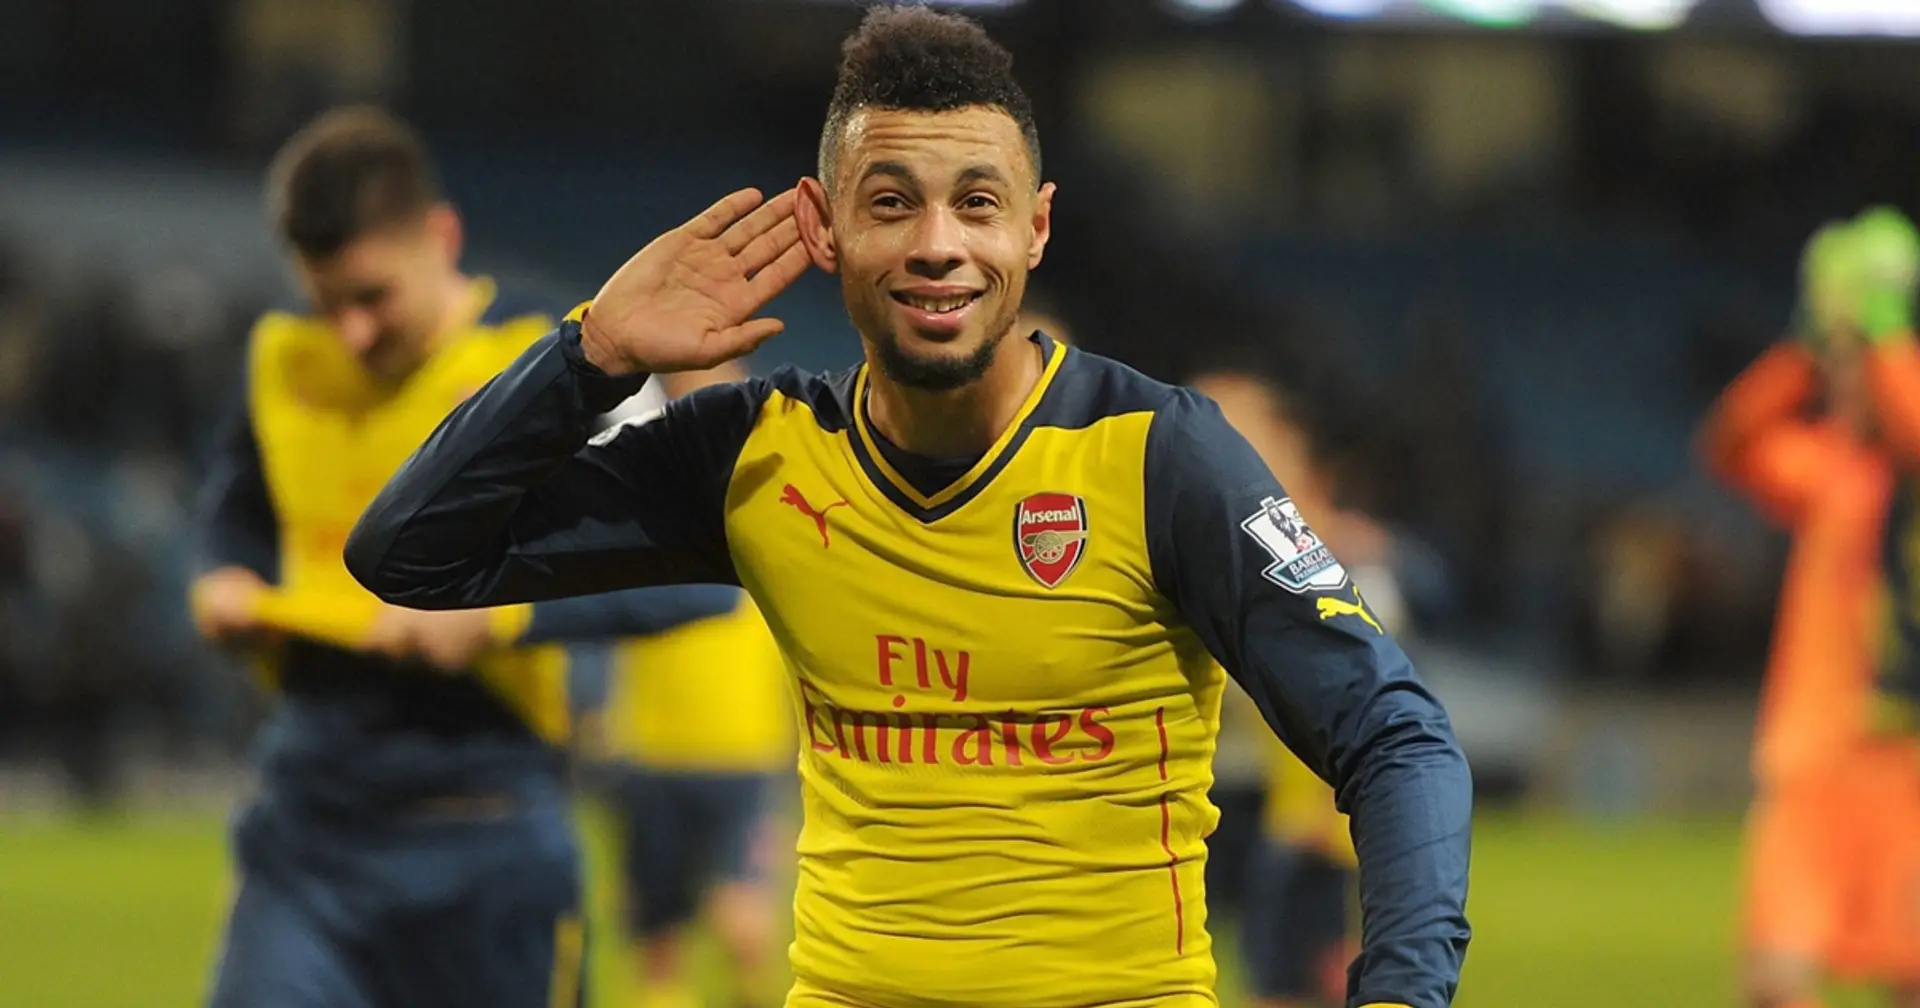 'You've been Coq blocked!': Coquelin's best Arsenal season in numbers as midfielder leaves Valencia